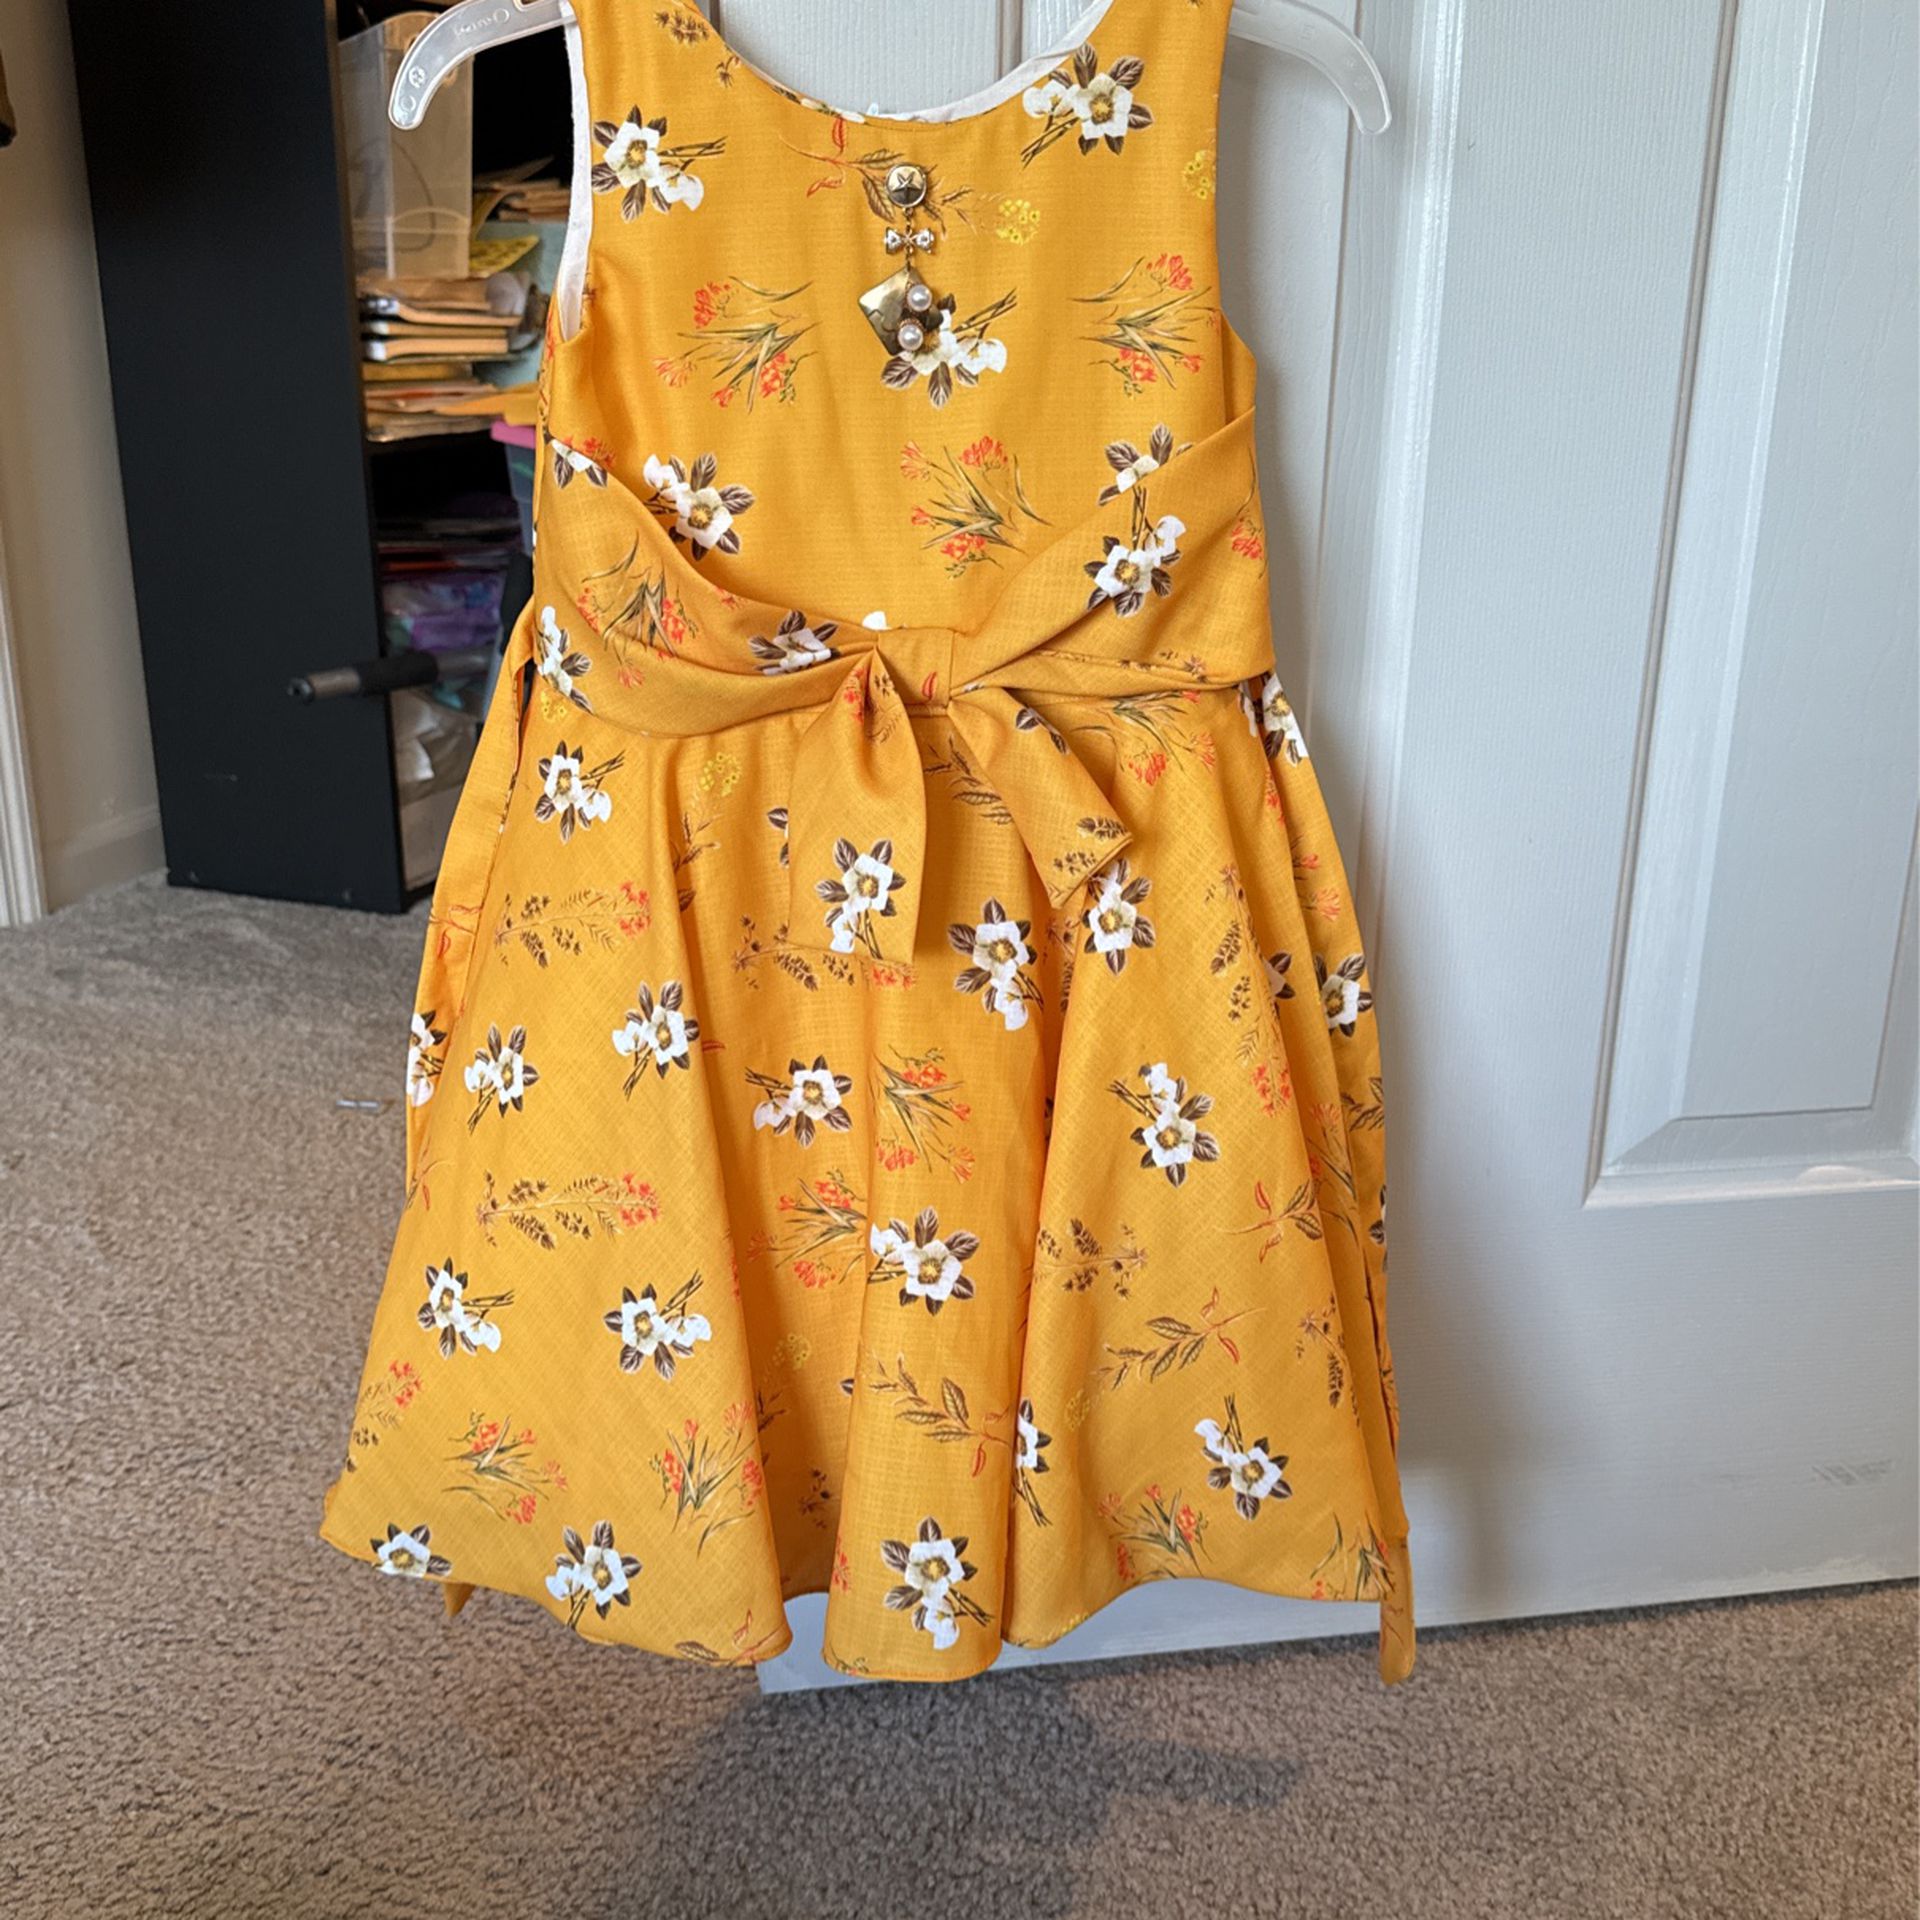 Girl’s 6 Yr Old Cute Yellow Floral Frock 